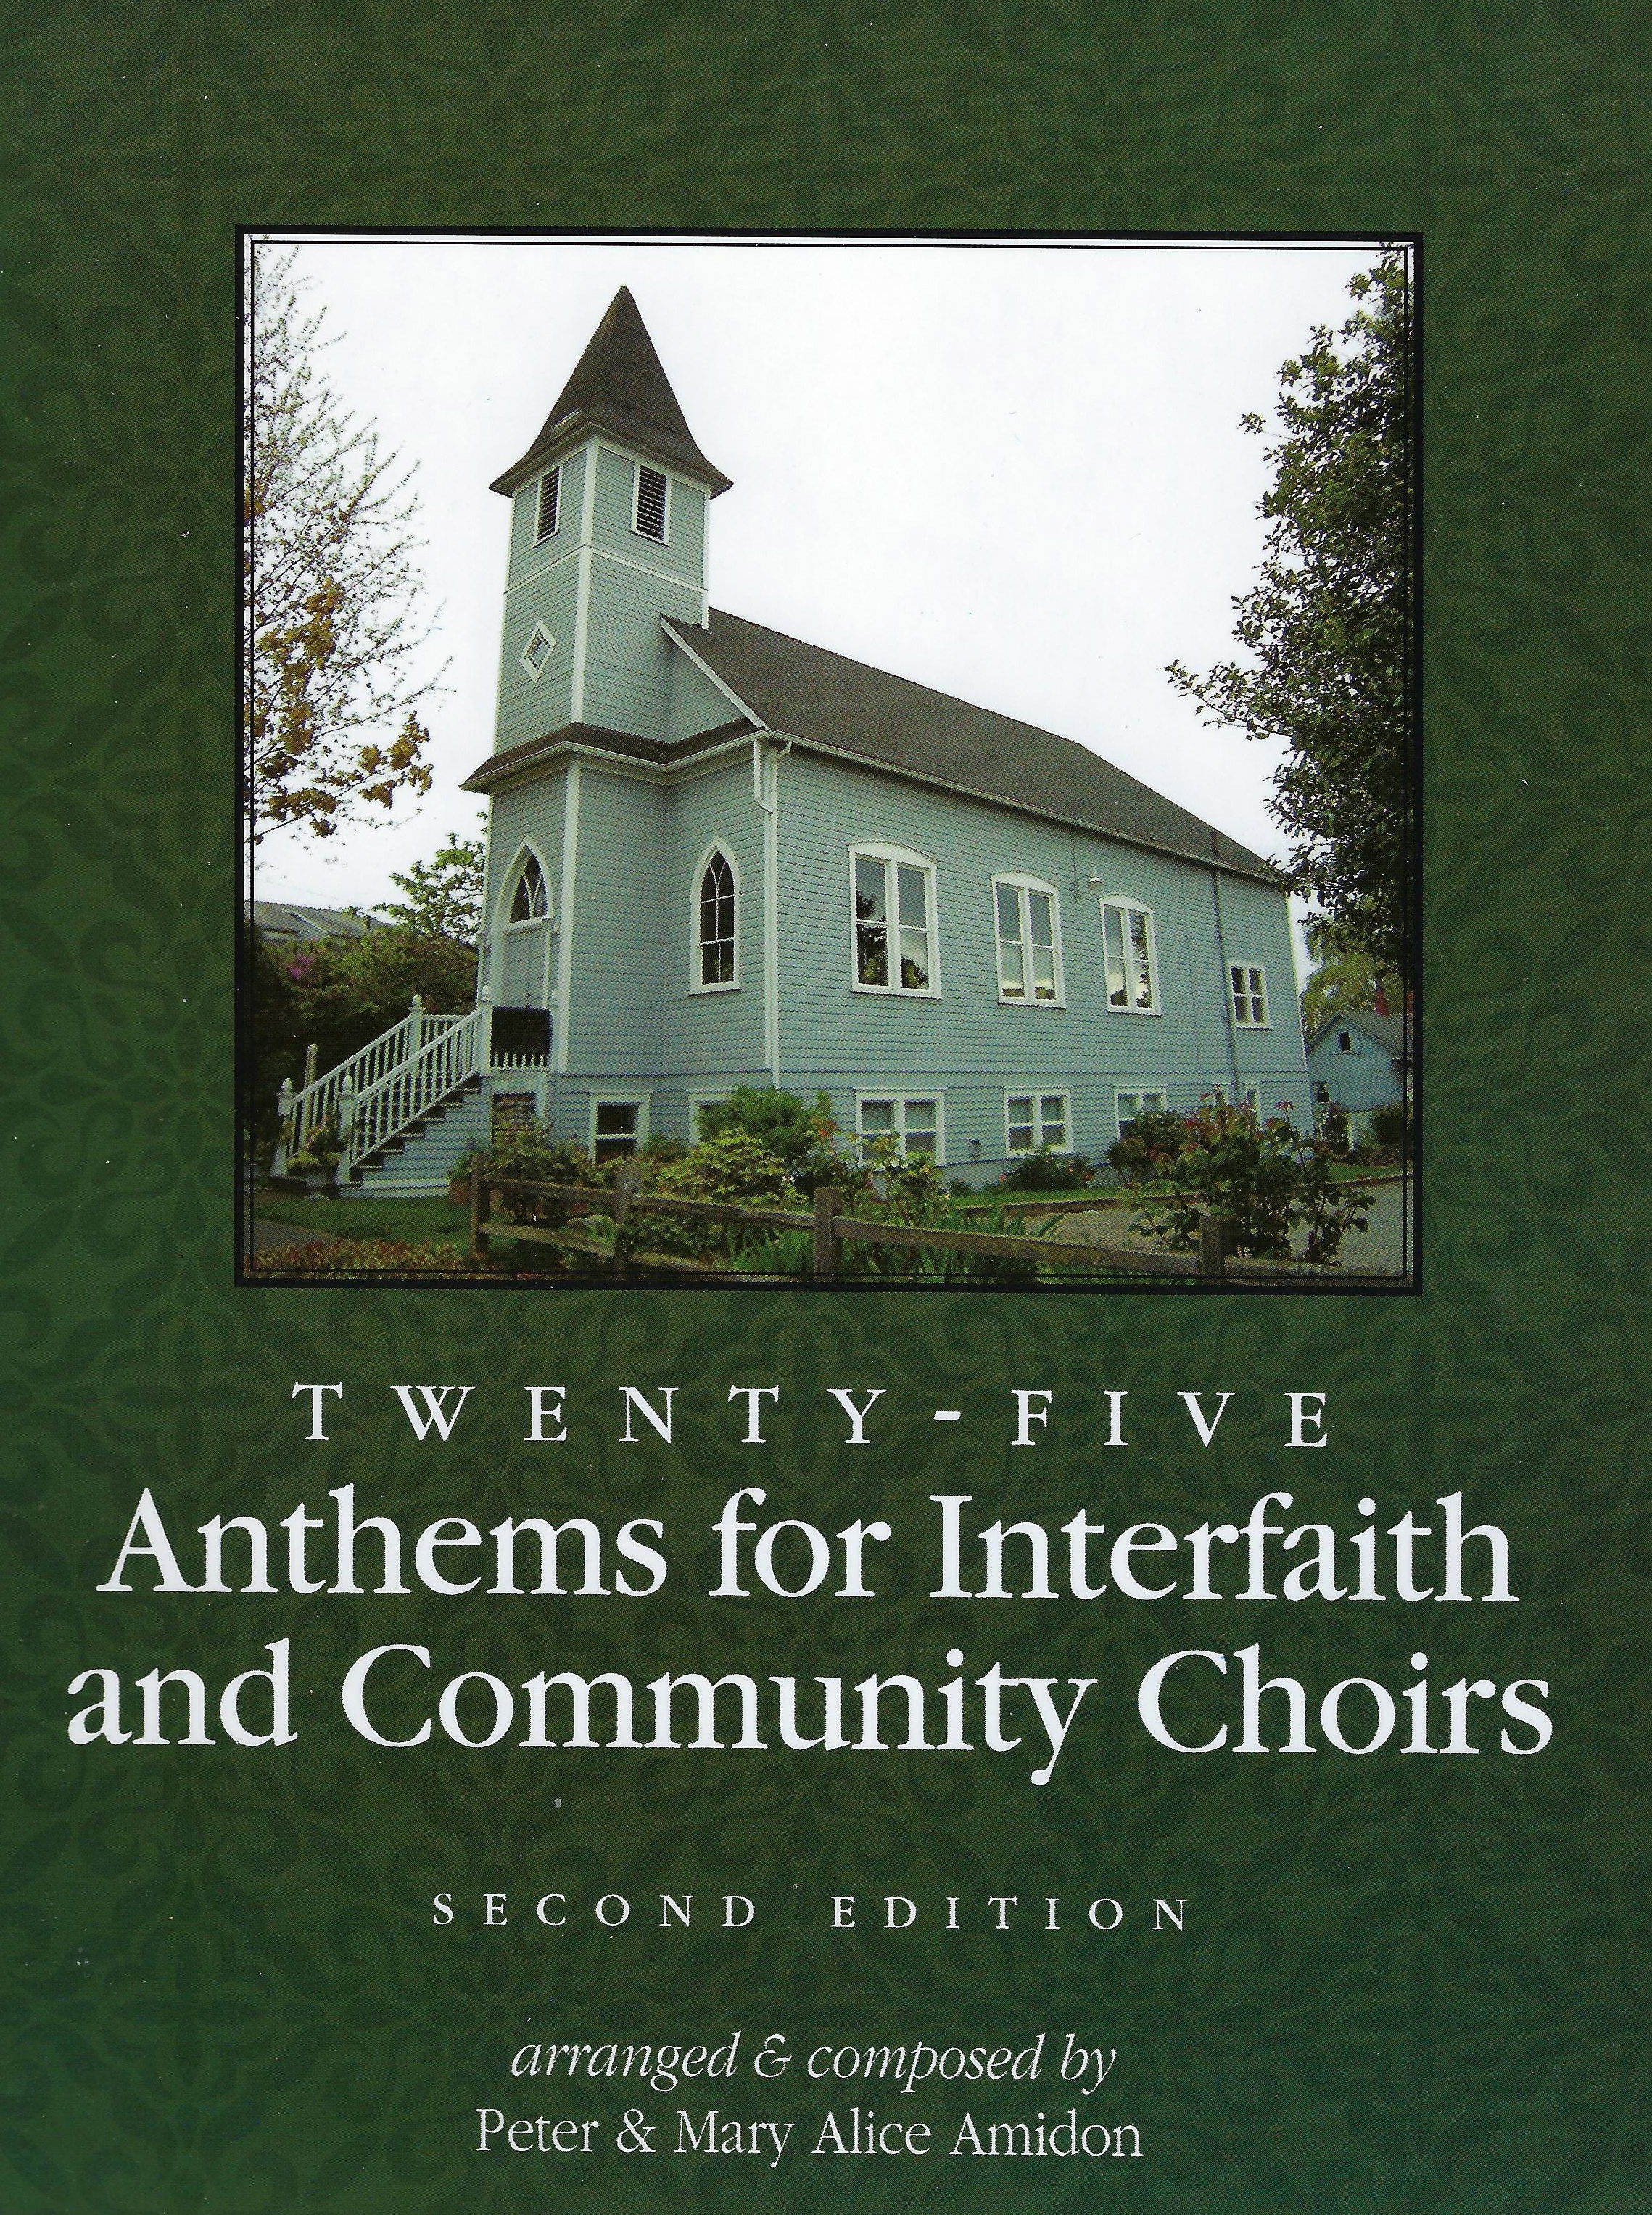 Twenty-five Anthems for Interfaith and Community Choirs, 2nd edition<br>Arranged and composed by Peter and Mary Alice Amidon